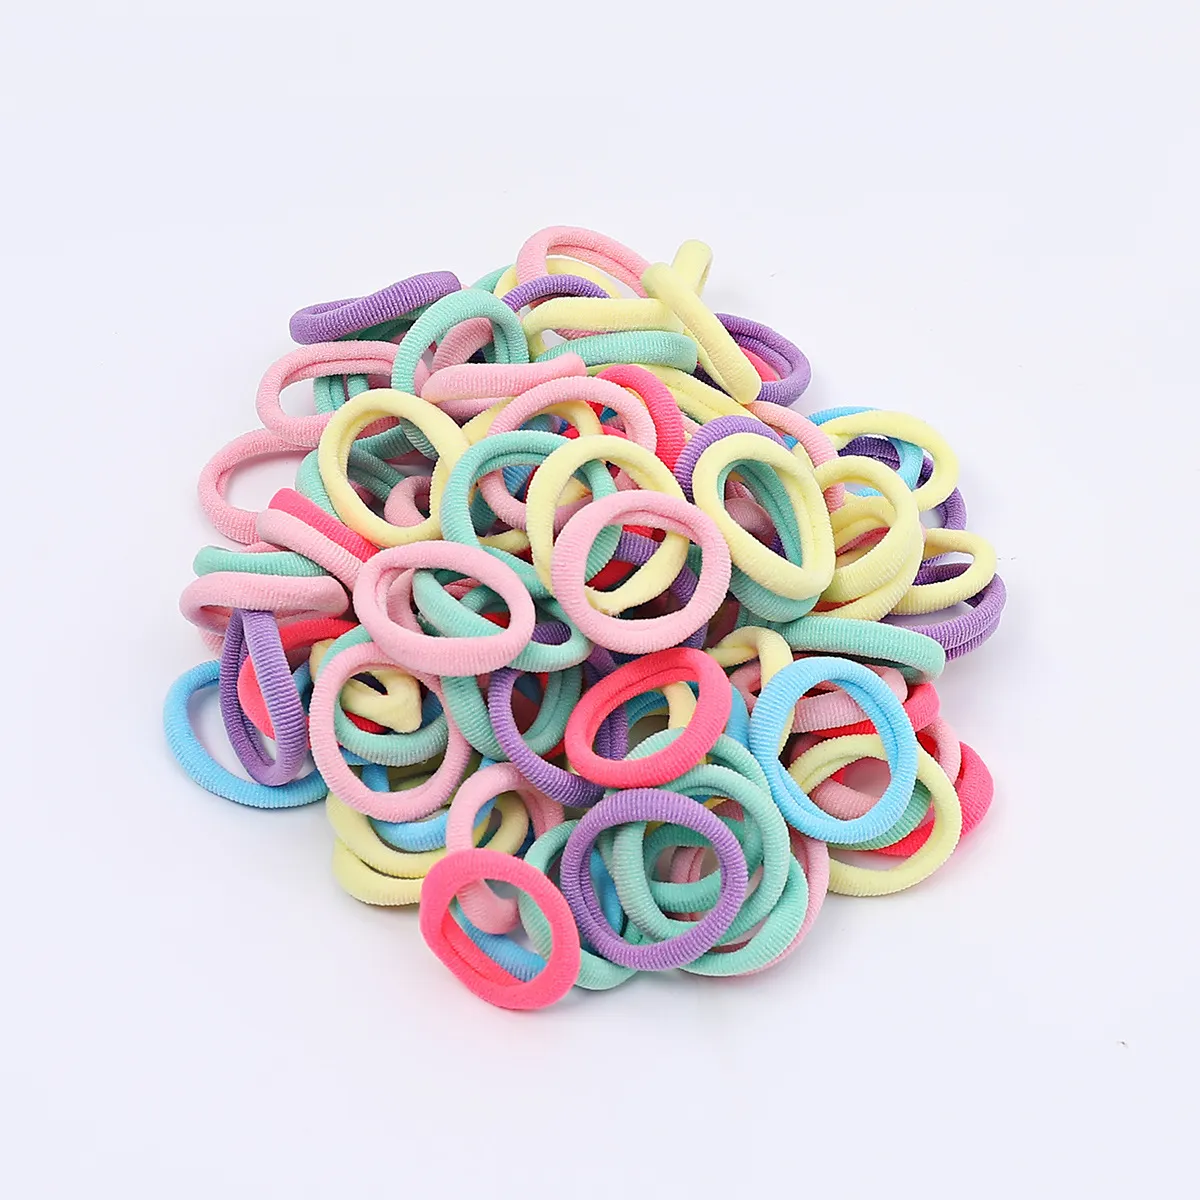 100 Pcs Seamless Hair Ties For Women Girls Hair Bands No Damage Ponytail  Holders Soft Hair Elastics (Candy Color) | 100 Pack Christmas Candy Color  Girls' Elastics Hair Ties Seamless Ponytail Holder |